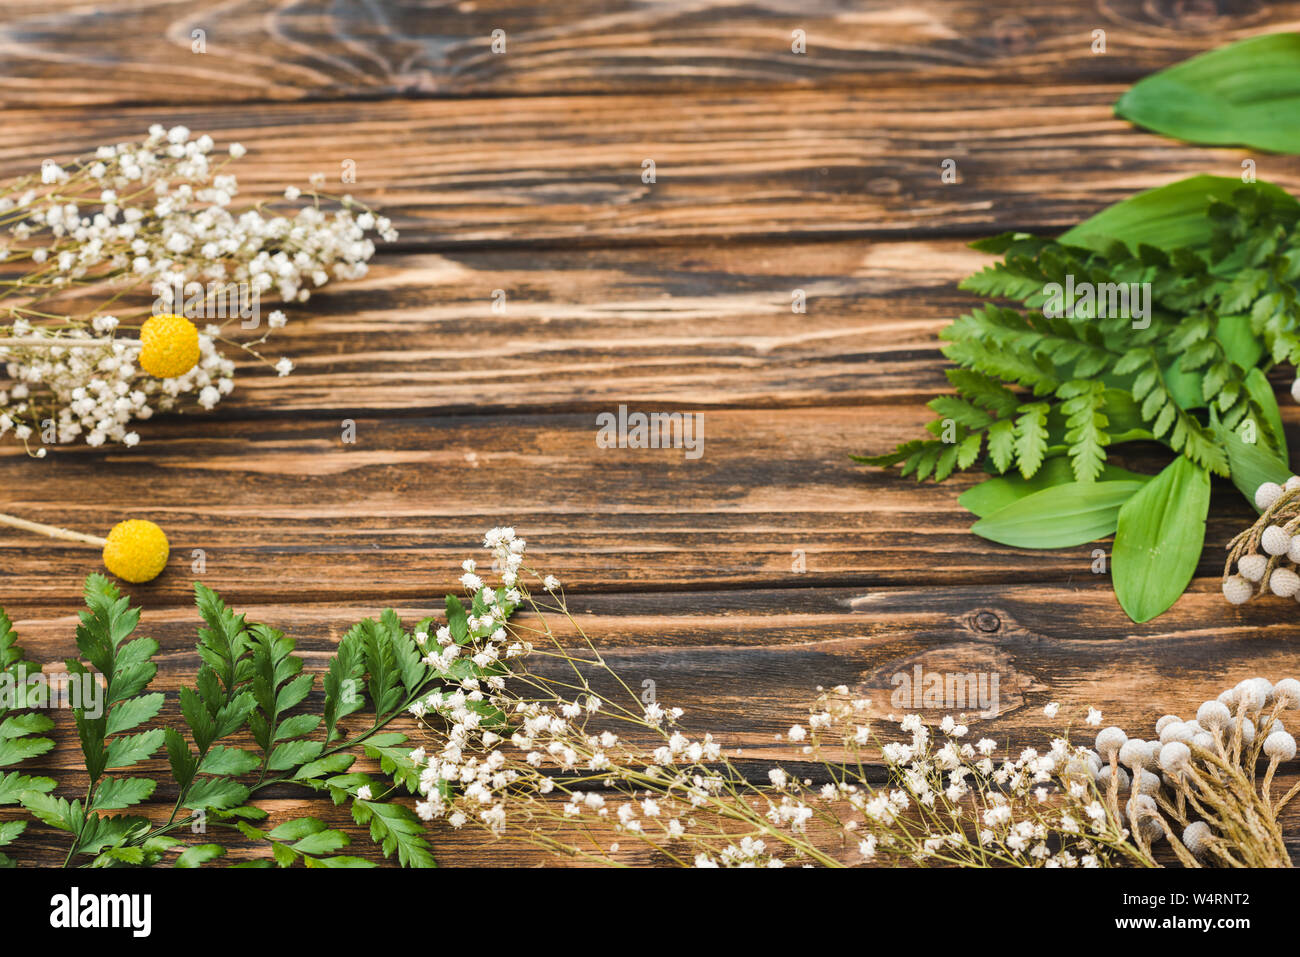 top view of white and yellow flowers and green leaves on wooden table Stock Photo